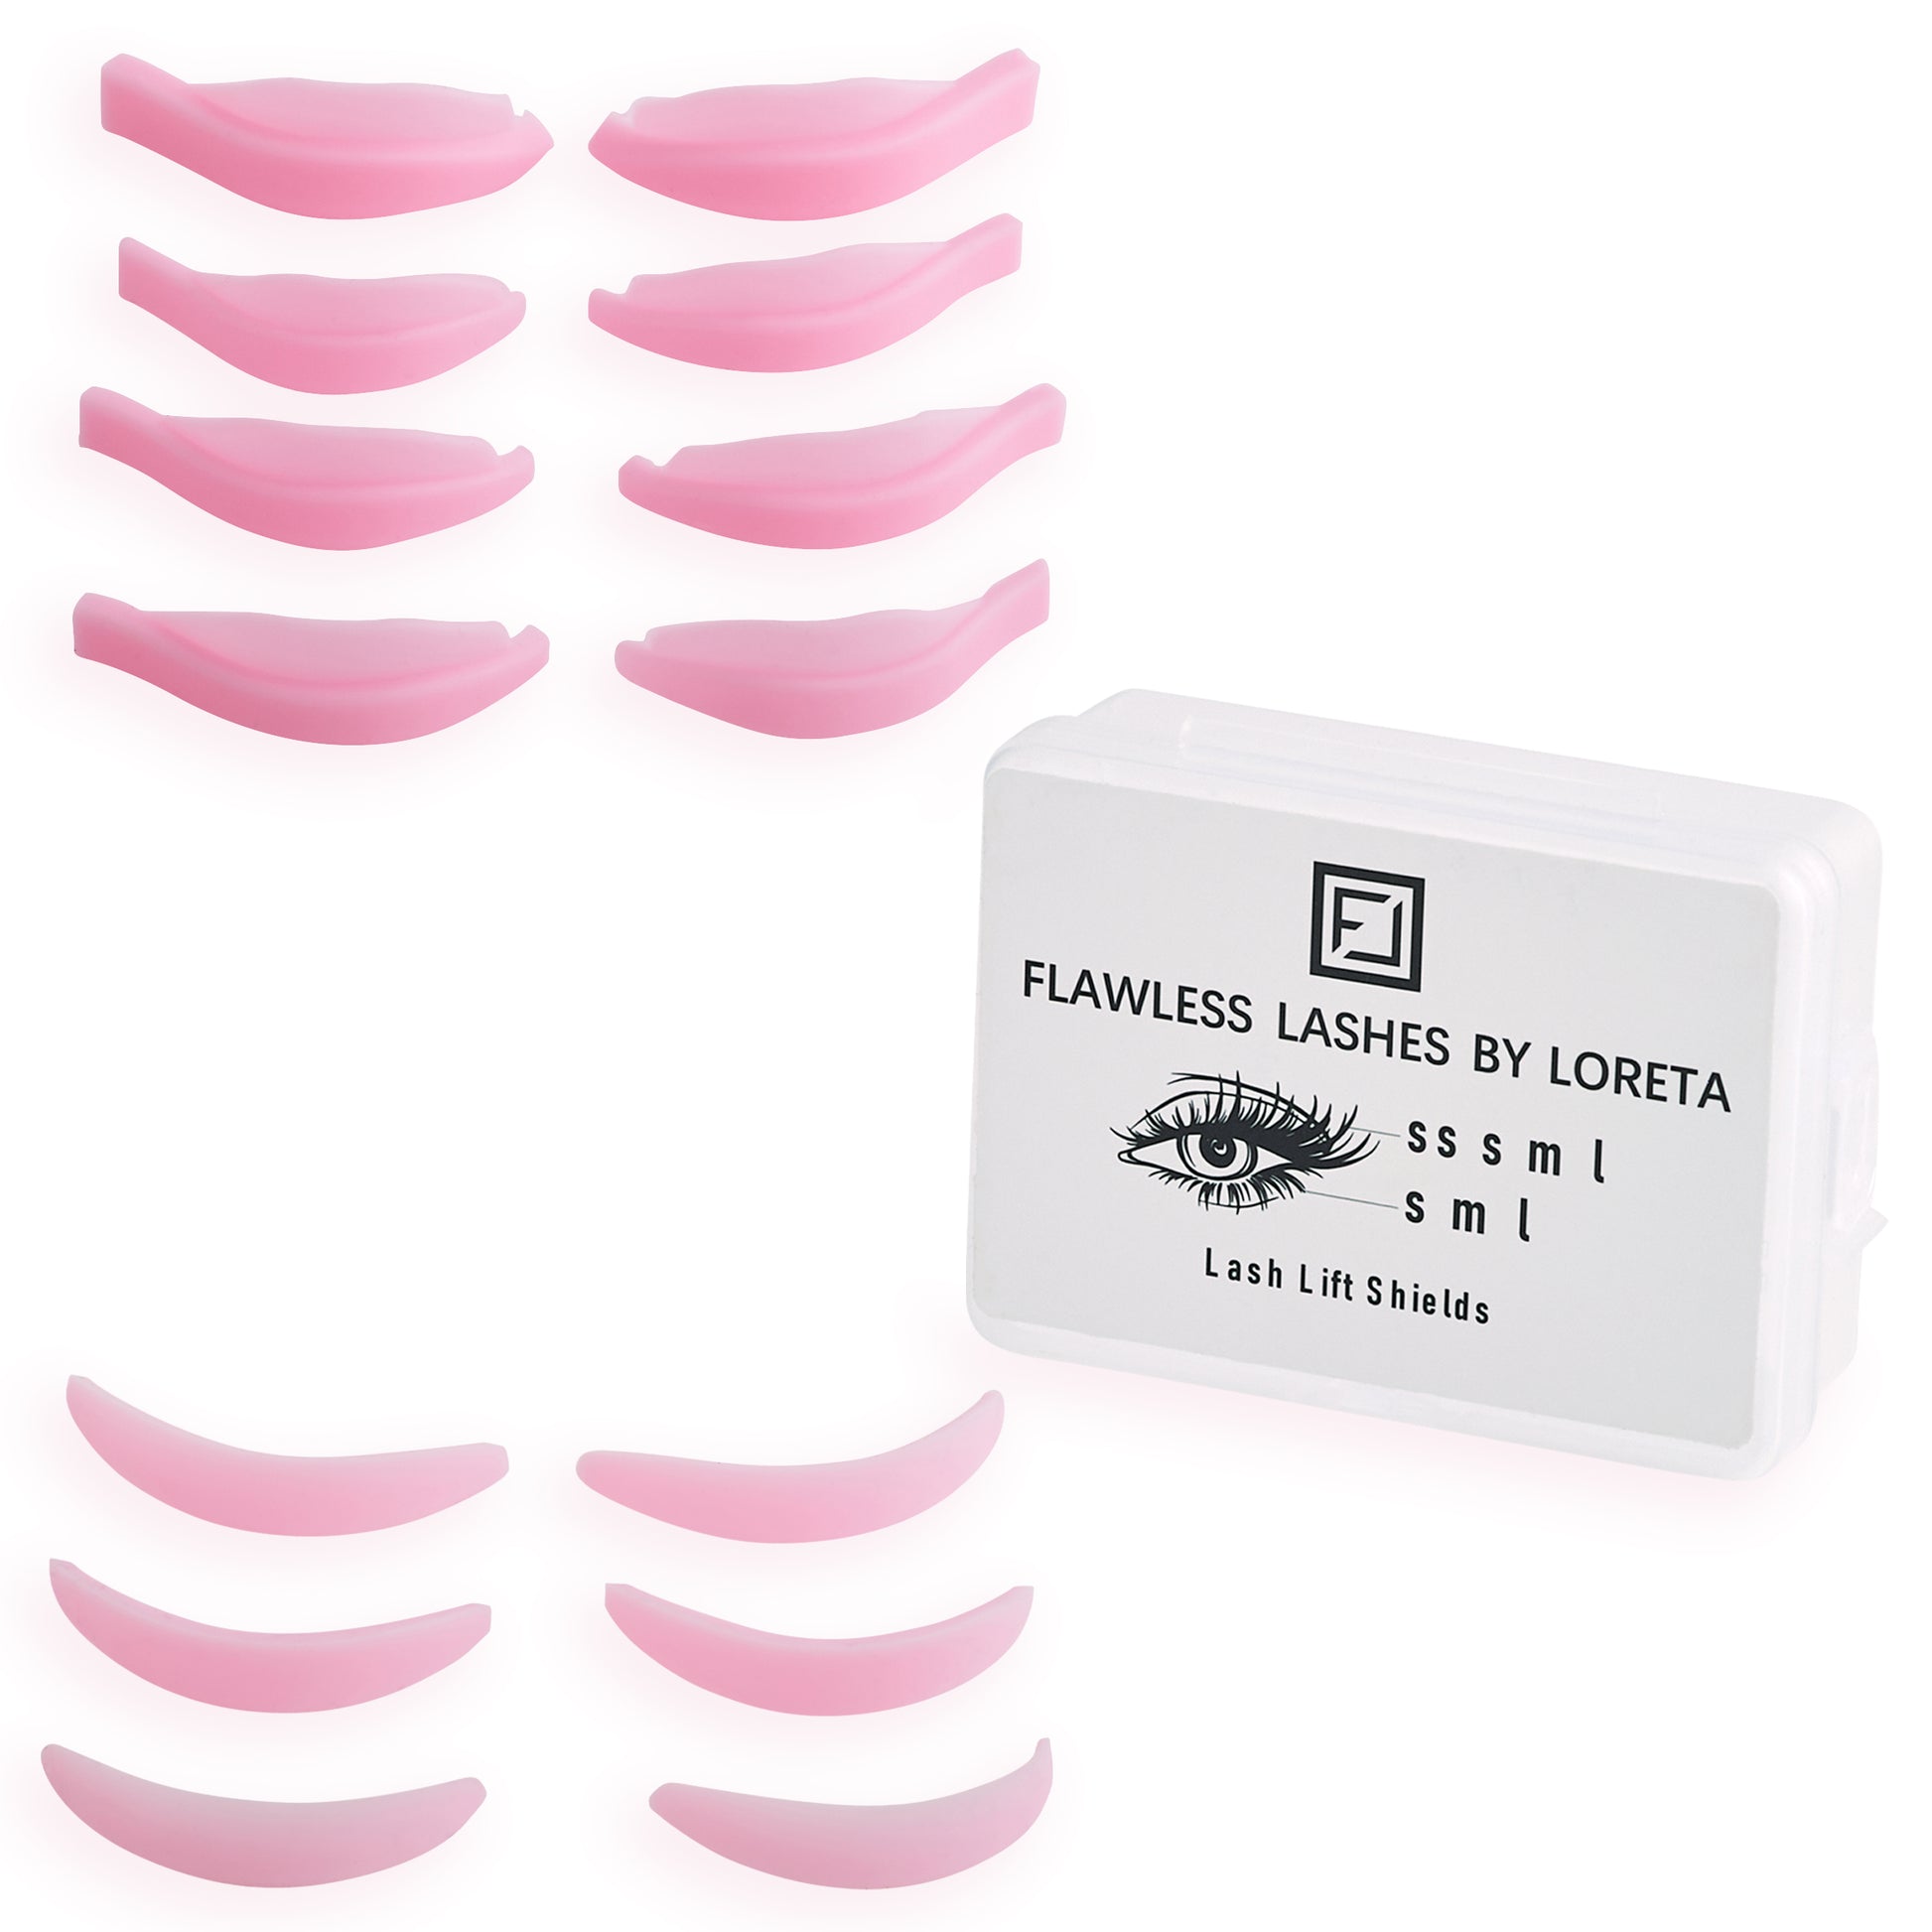 Selbsthaftende Silikon Pads Rosa Gr. M, L-Curl, 4 Paare, M